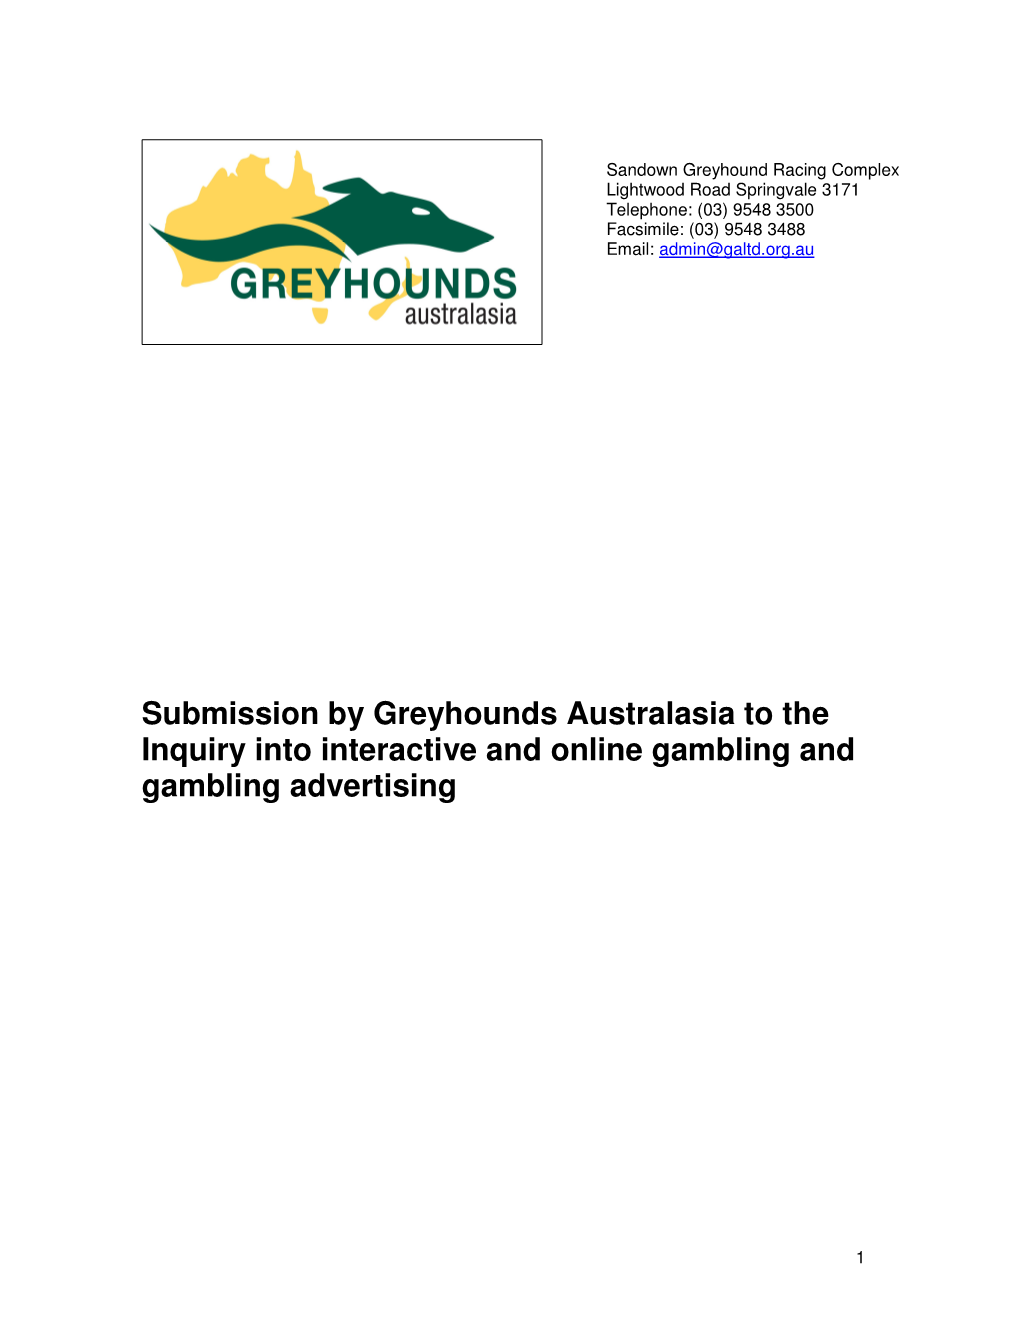 Submission by Greyhounds Australasia to the Inquiry Into Interactive and Online Gambling and Gambling Advertising